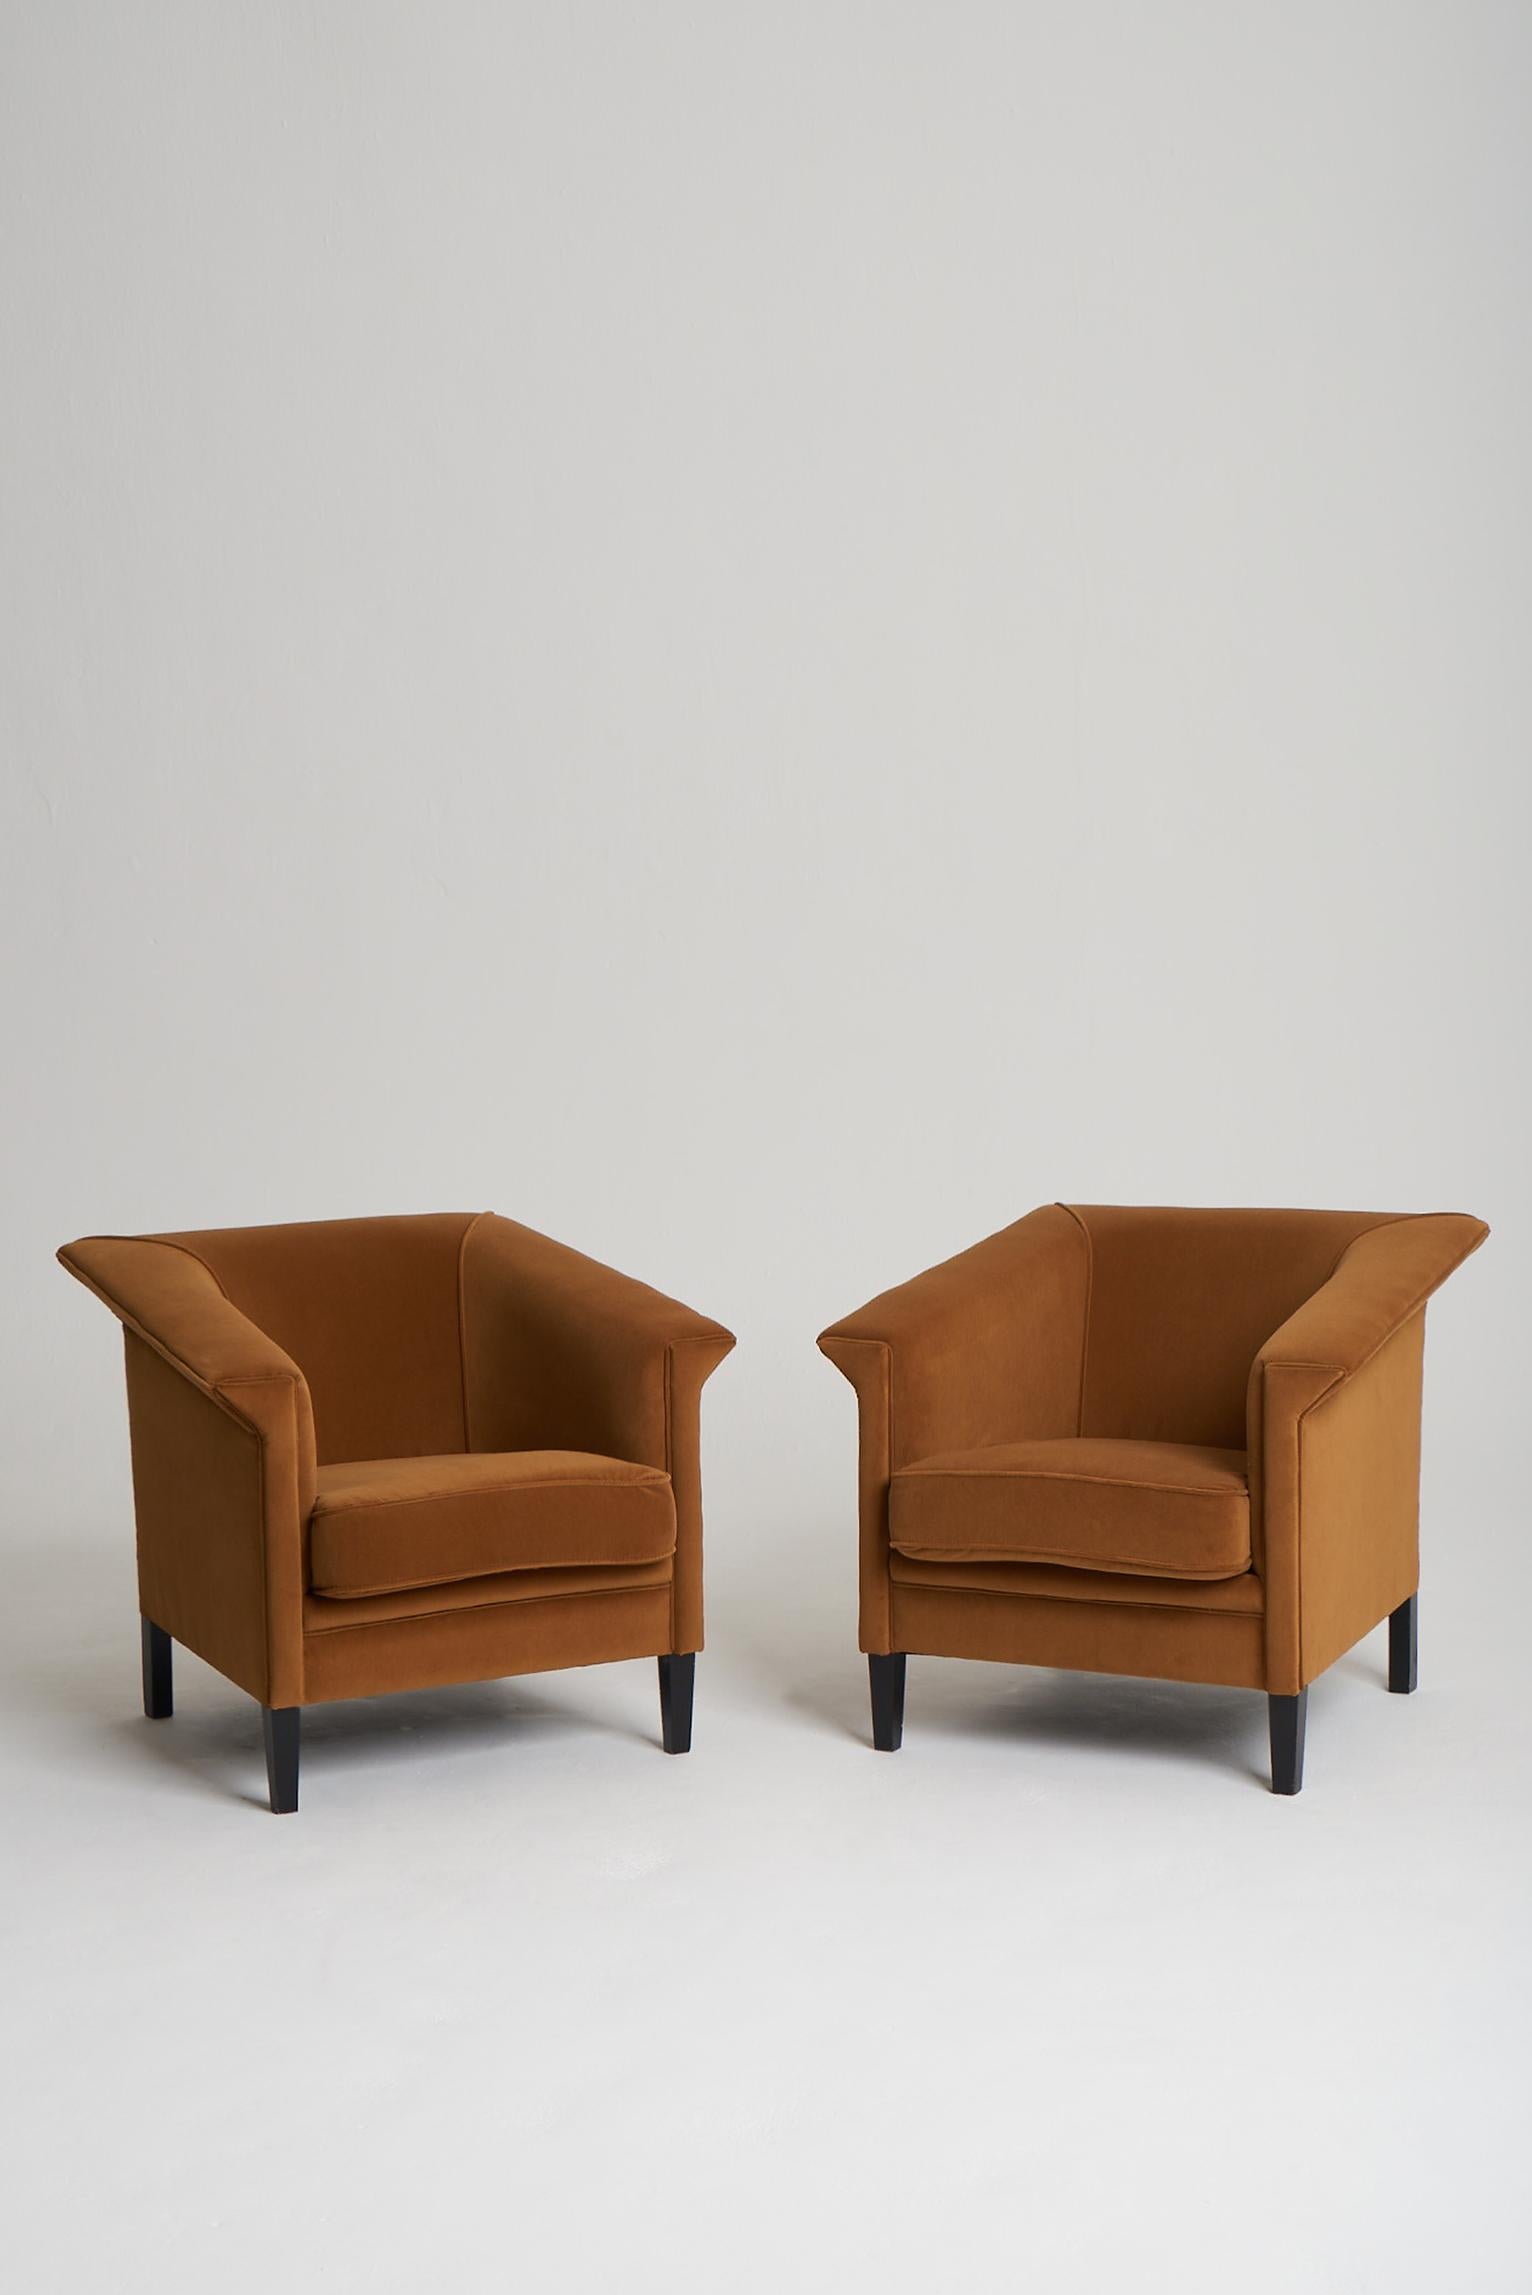 A pair of club chairs, upholstered in mustard velvet.
France, mid 20th century.